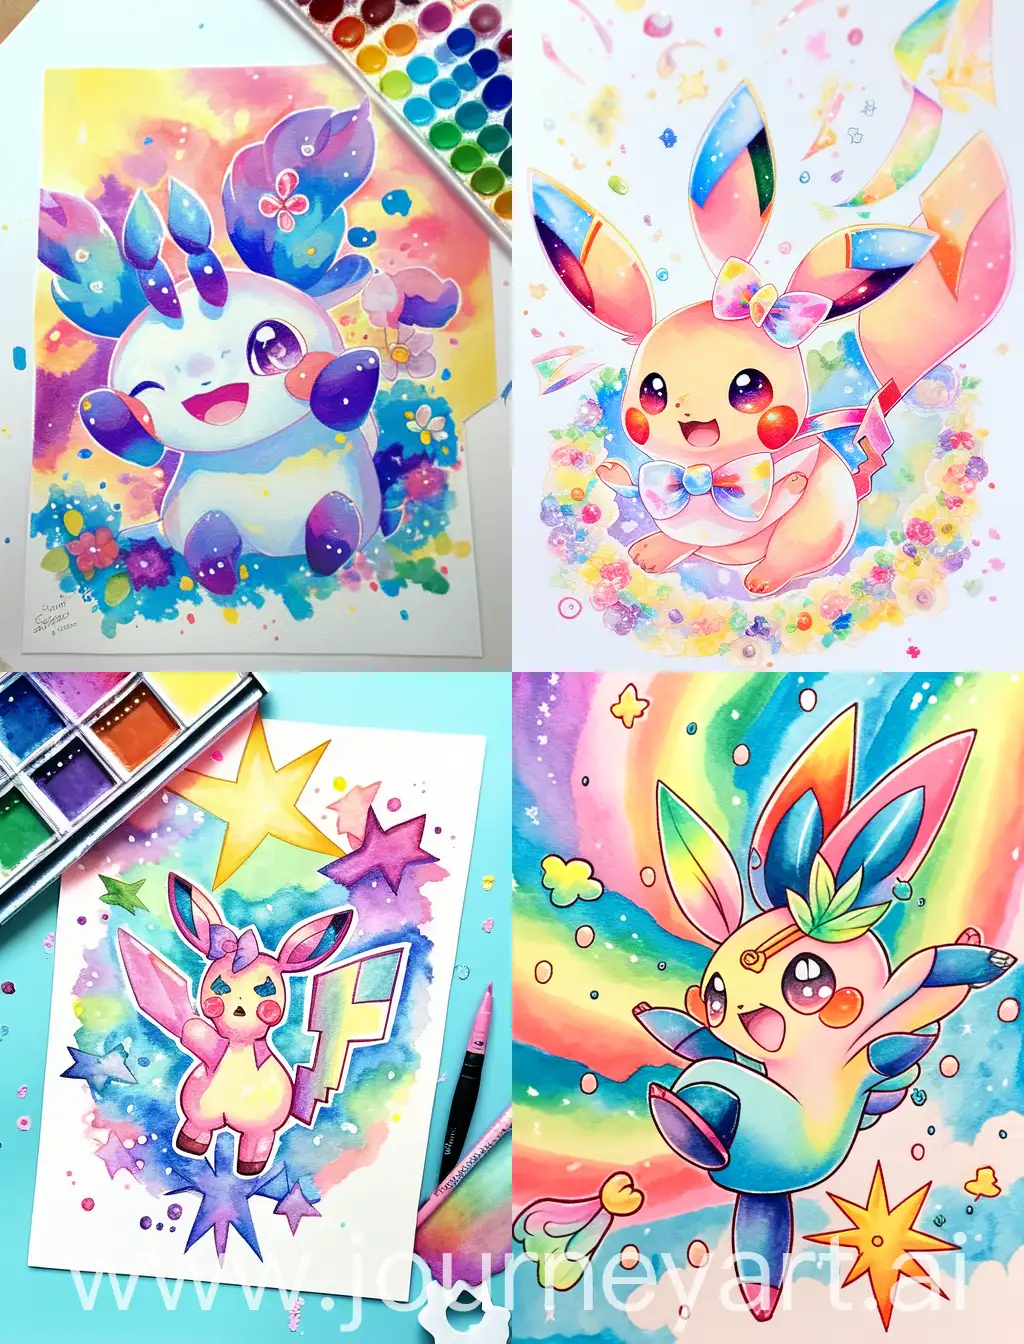 a dazzling and celebratory Pokémon that spreads joy with its radiant colors and festive energy! 🌈✨, anime style, watercolor